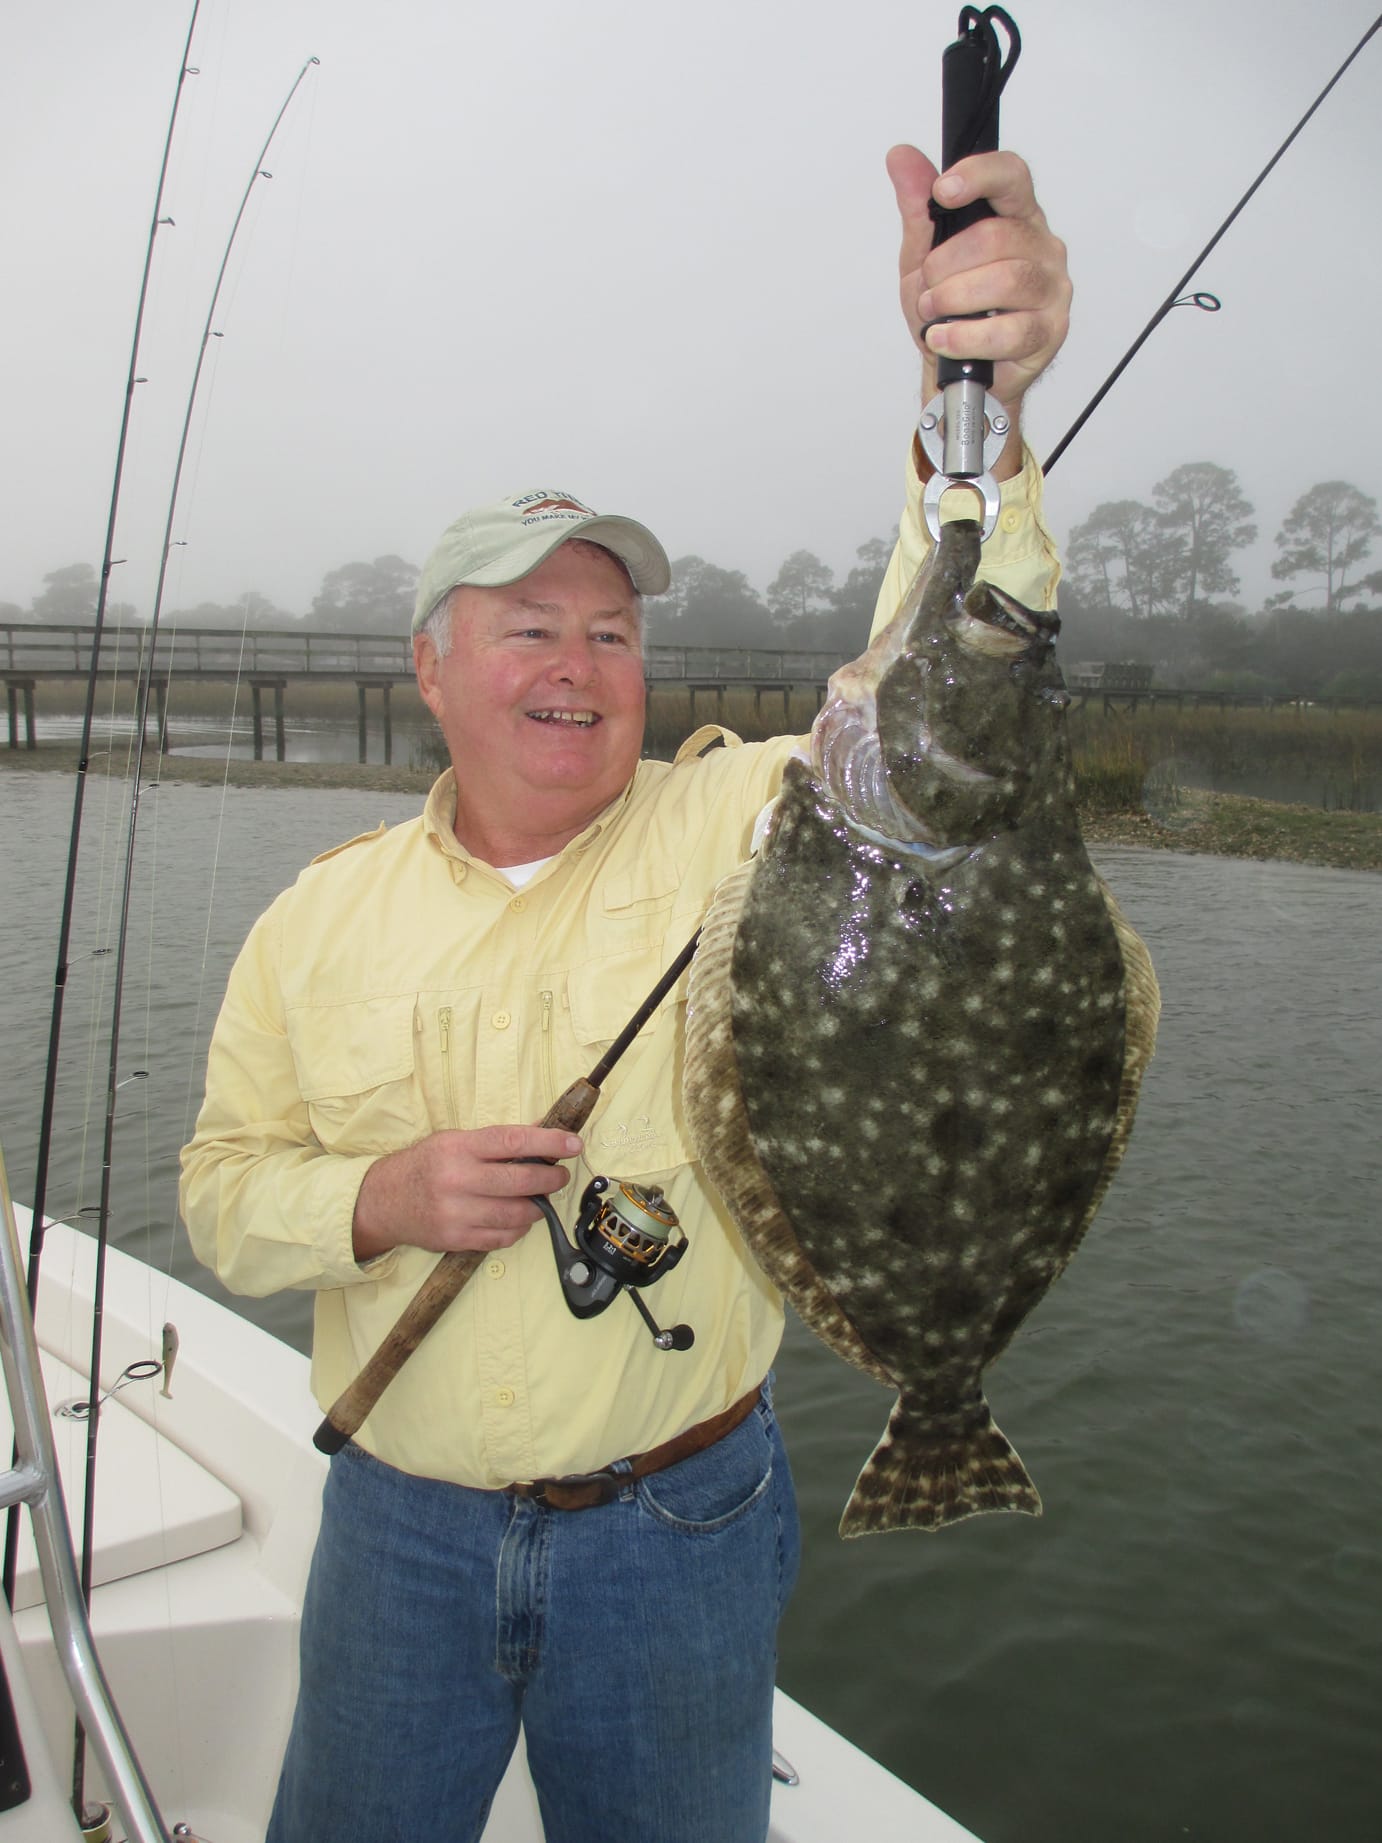 Docks and piers are fish magnets in both fresh and saltwater. The author Bob McNally caught this hefty flounder from a tidewater dock.